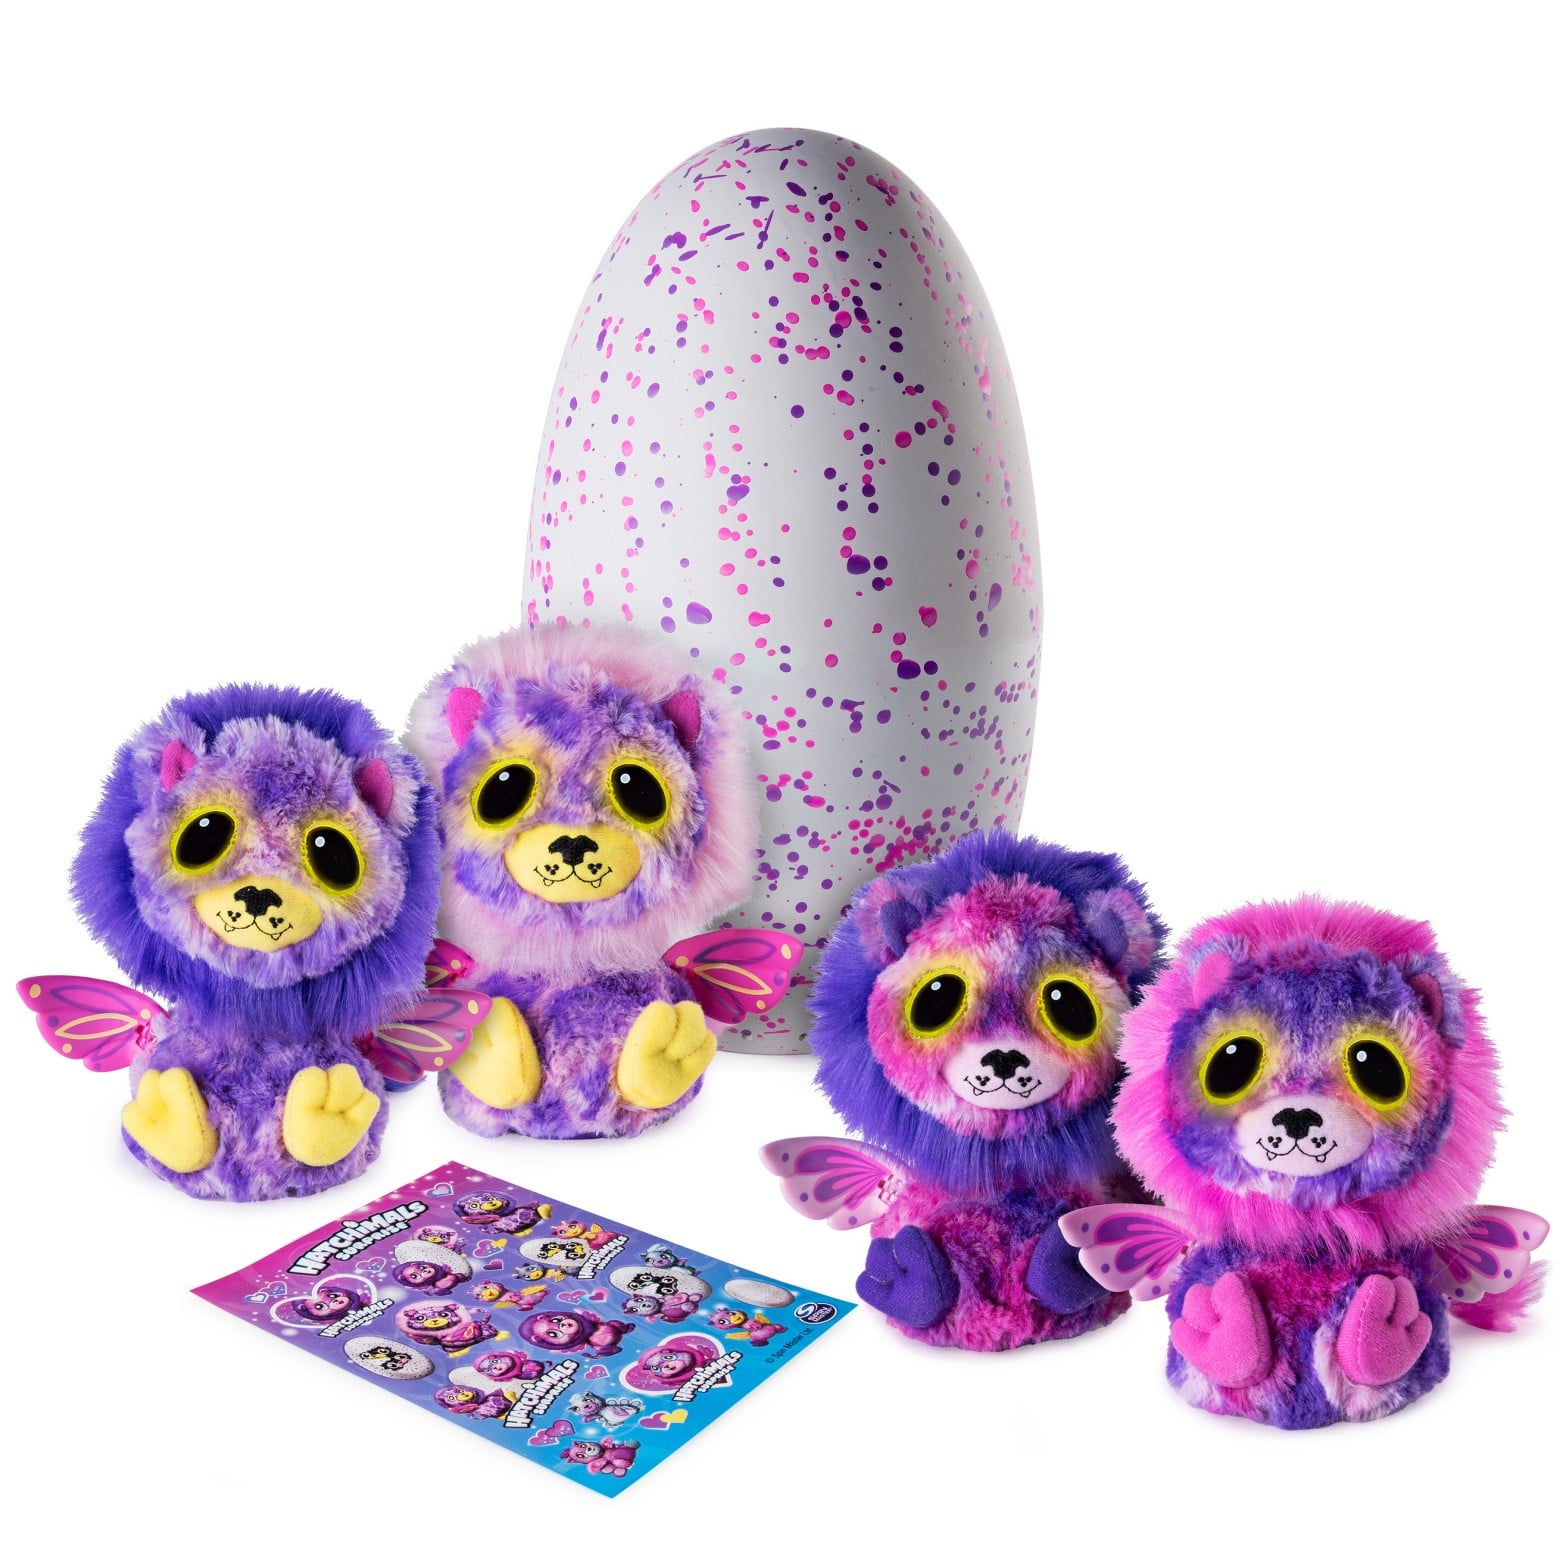 Details about   Hatchimals Surprise Twins Deeriole Target Exclusive Rare VHTF Hot Christmas Toy 